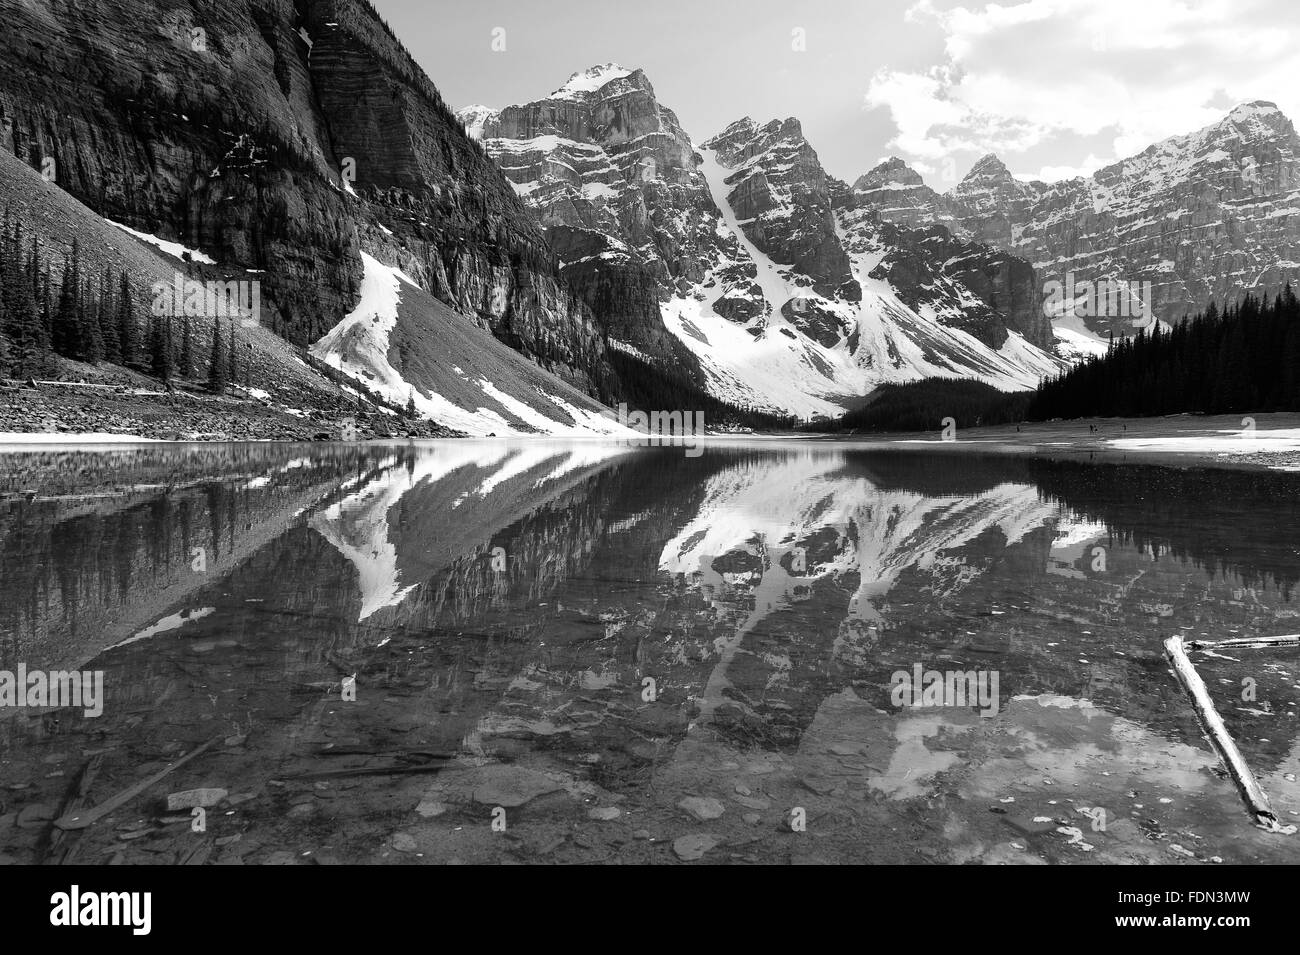 Valley of Ten Peaks glaciers scenic view with reflections in Moraine Lake in Banff National Park, Alberta, Canada Stock Photo